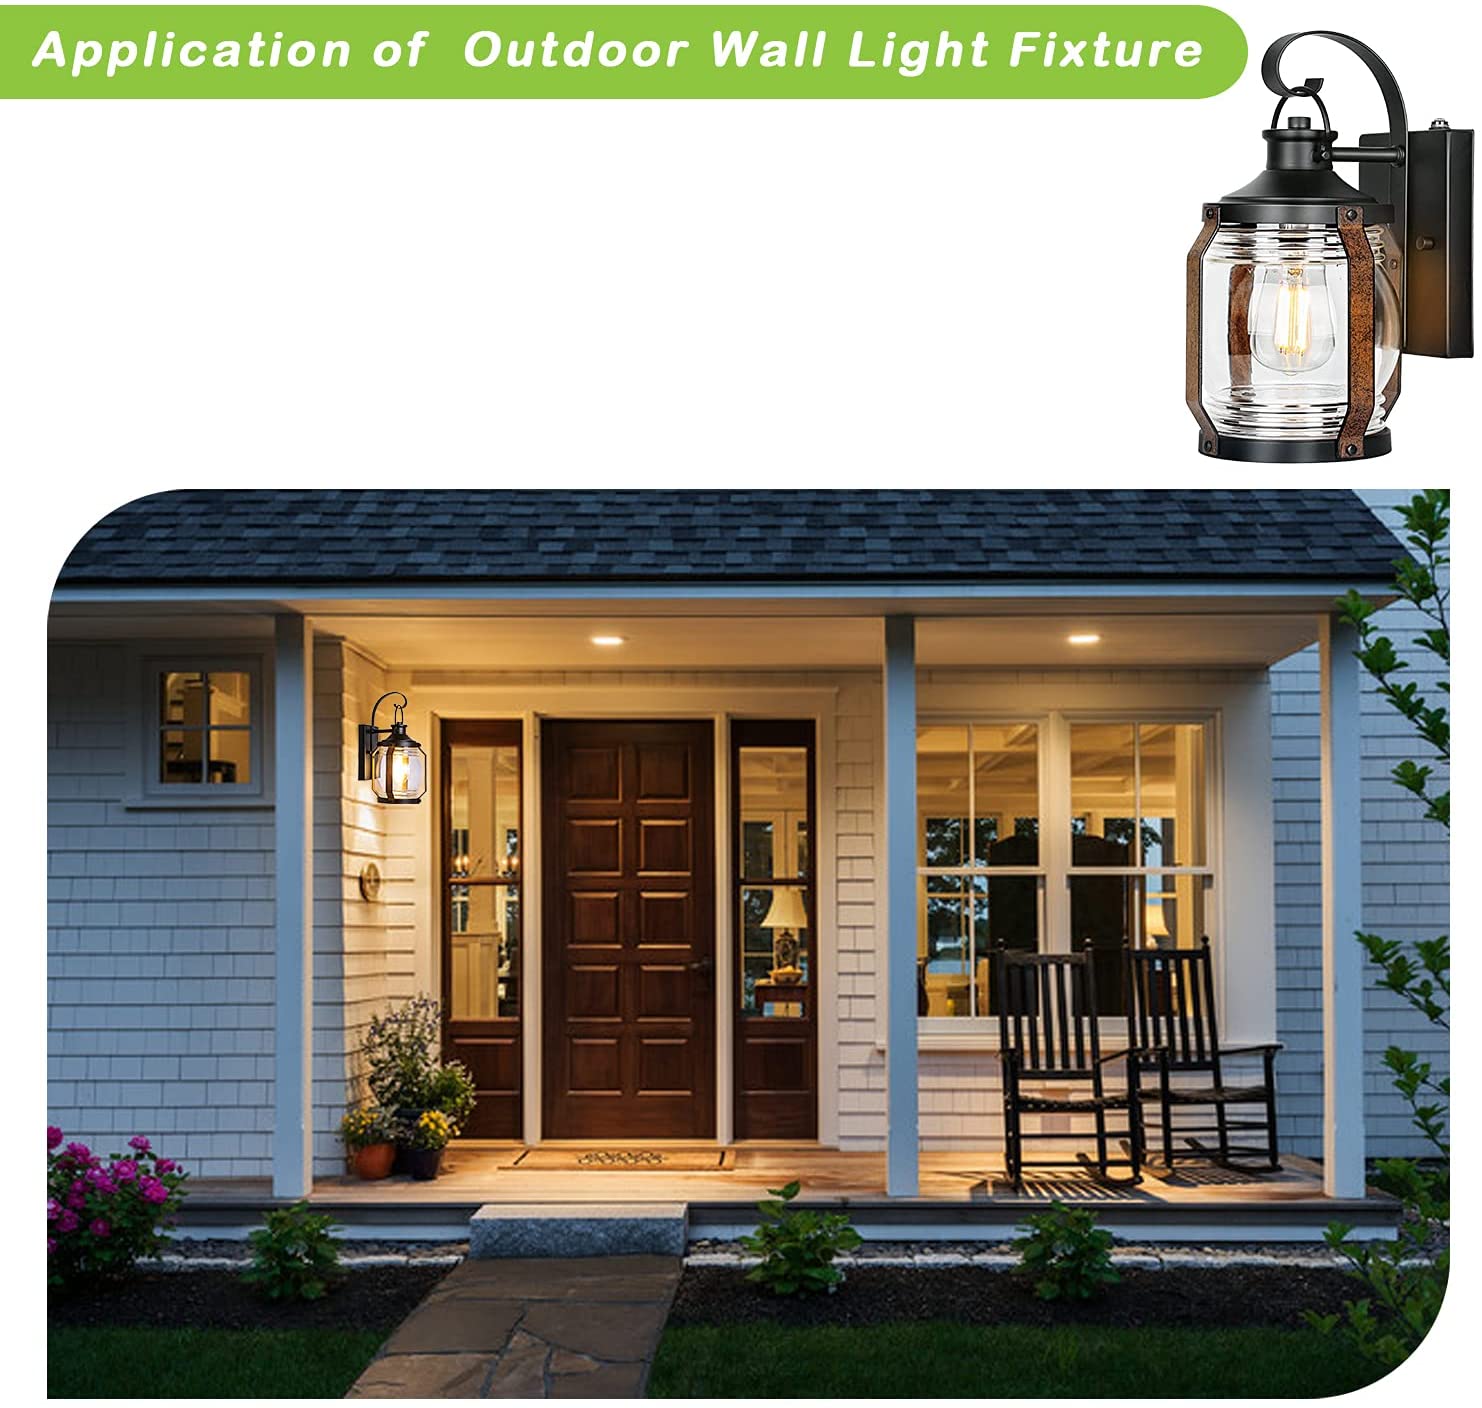 2 Pack wall lights fixture with dusk to down sensor black Glass wall sconce